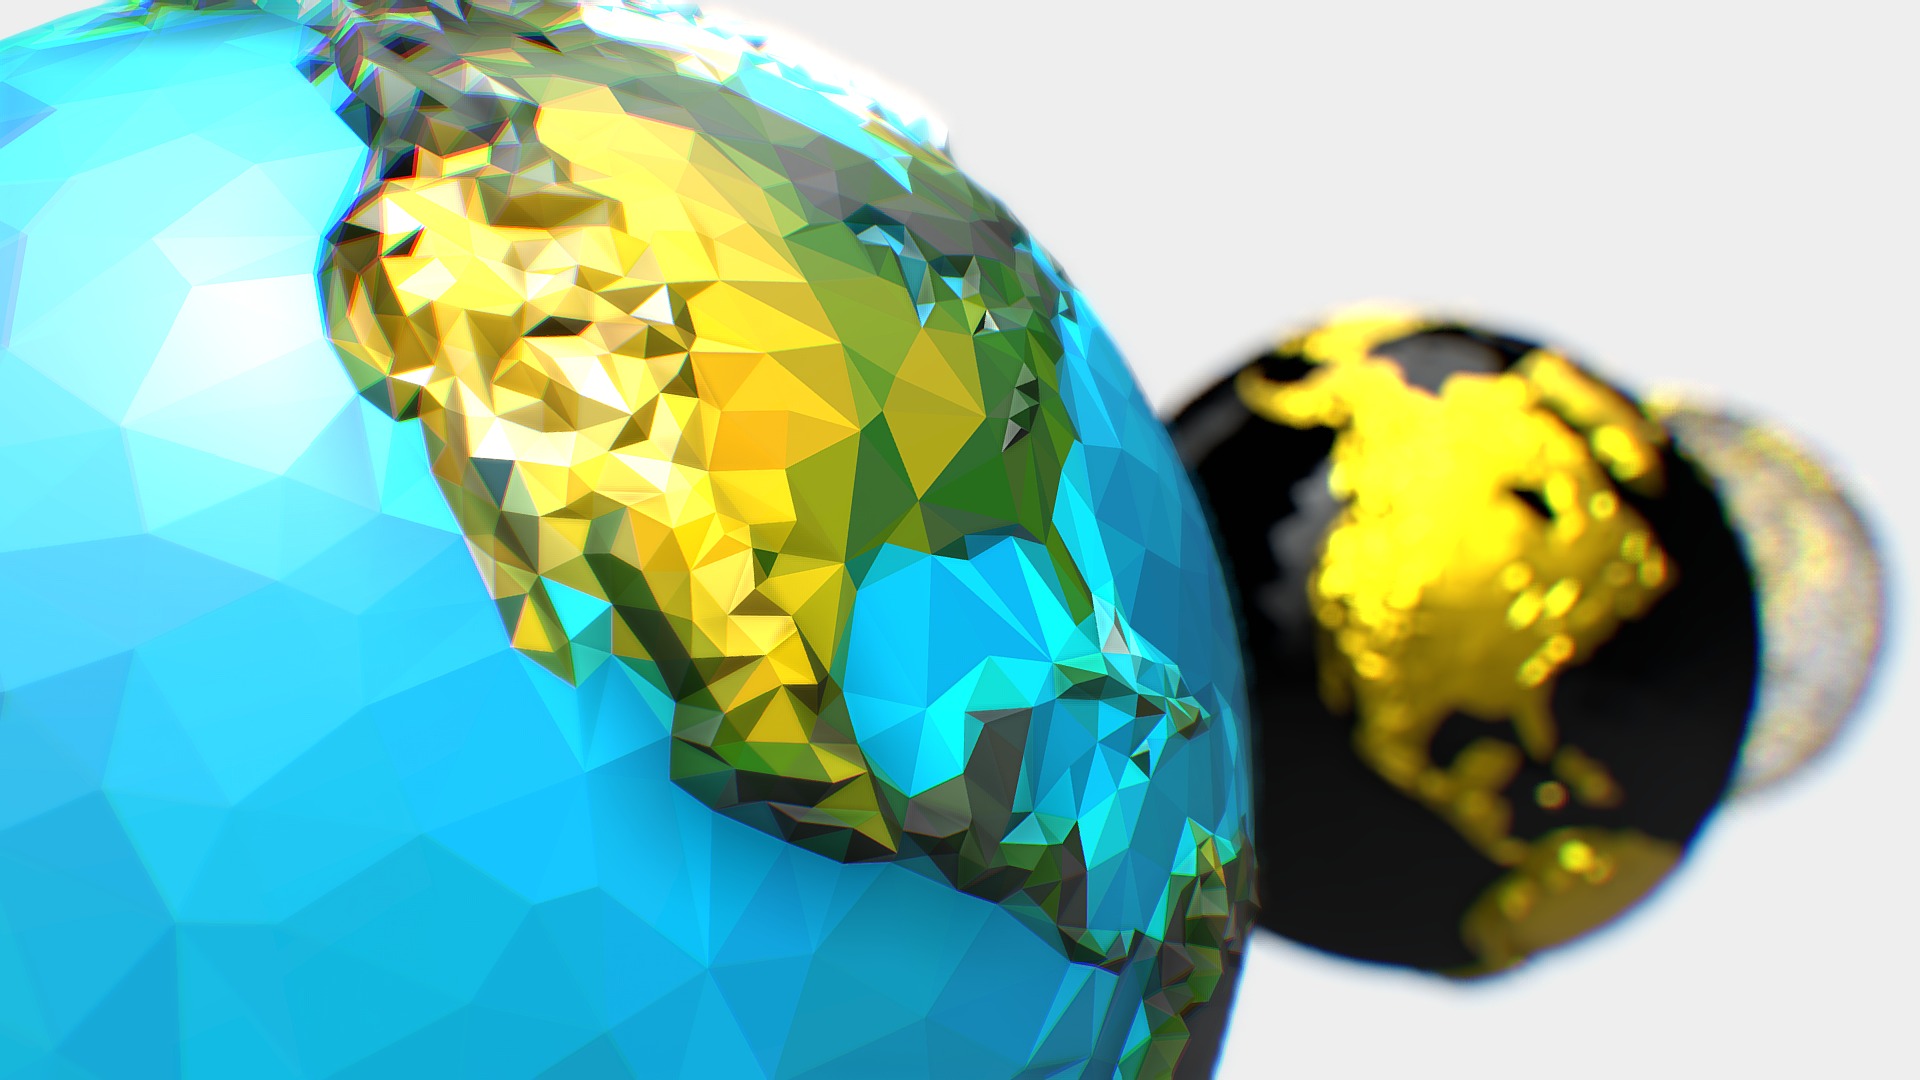 3D model Lowpoly Earth Meshes - This is a 3D model of the Lowpoly Earth Meshes. The 3D model is about a turtle on a blue surface.